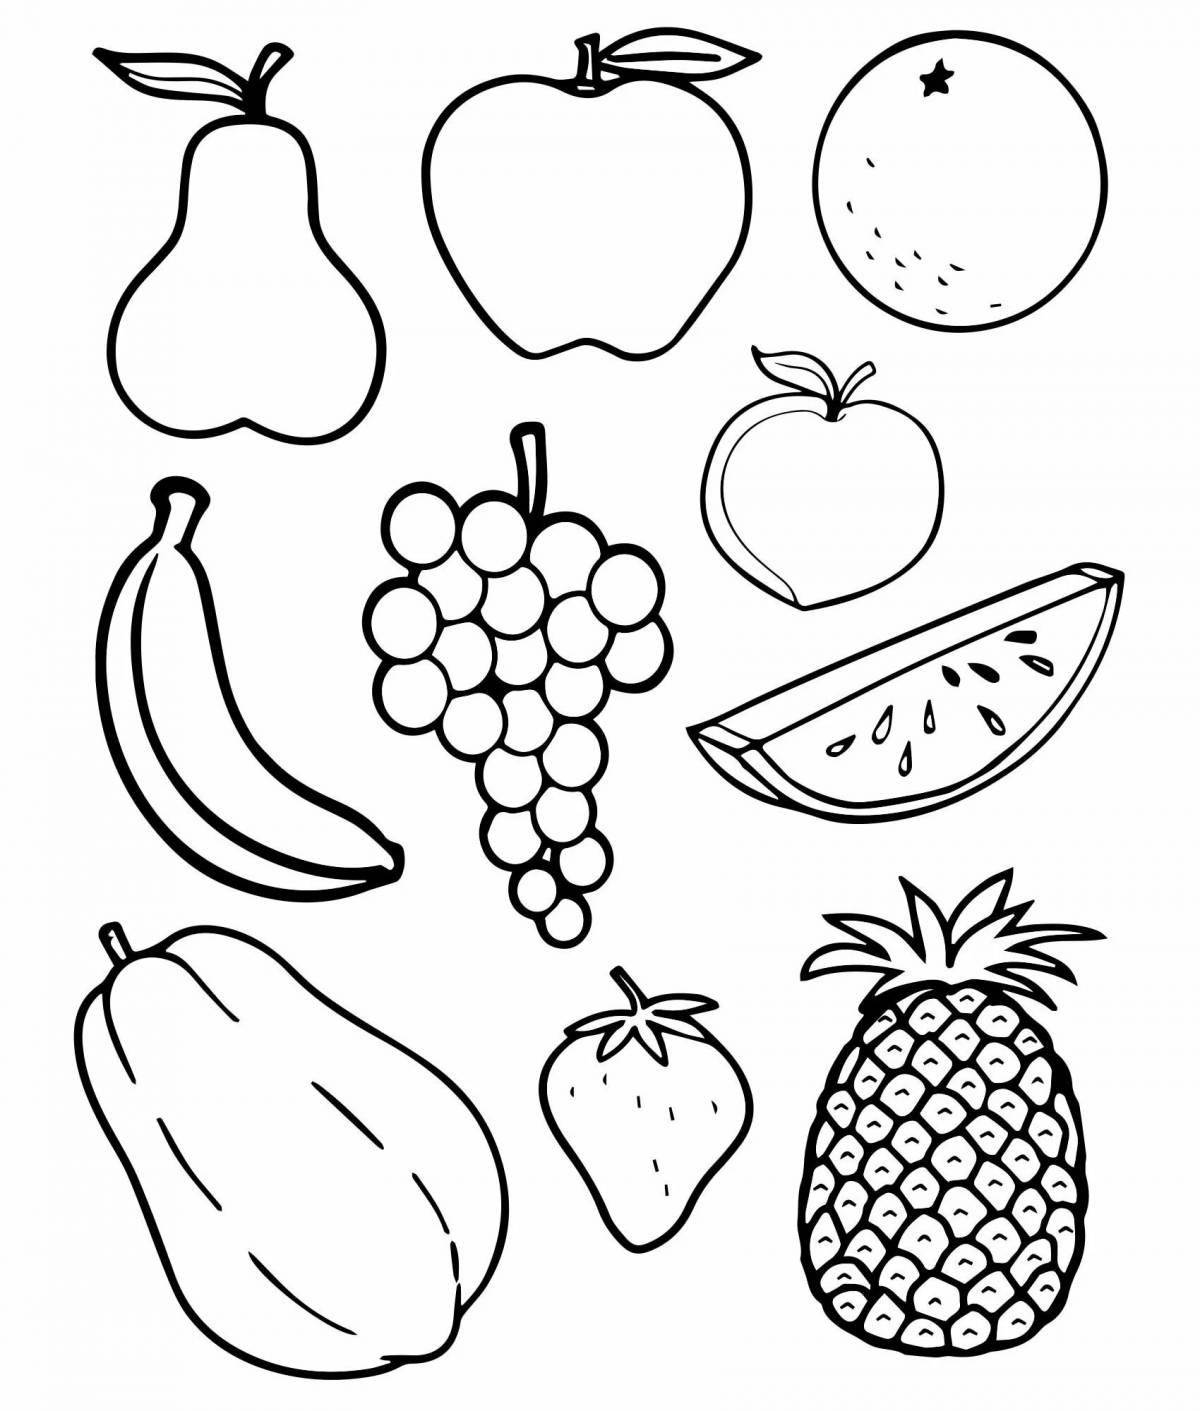 Coloring book joyful fruits and vegetables